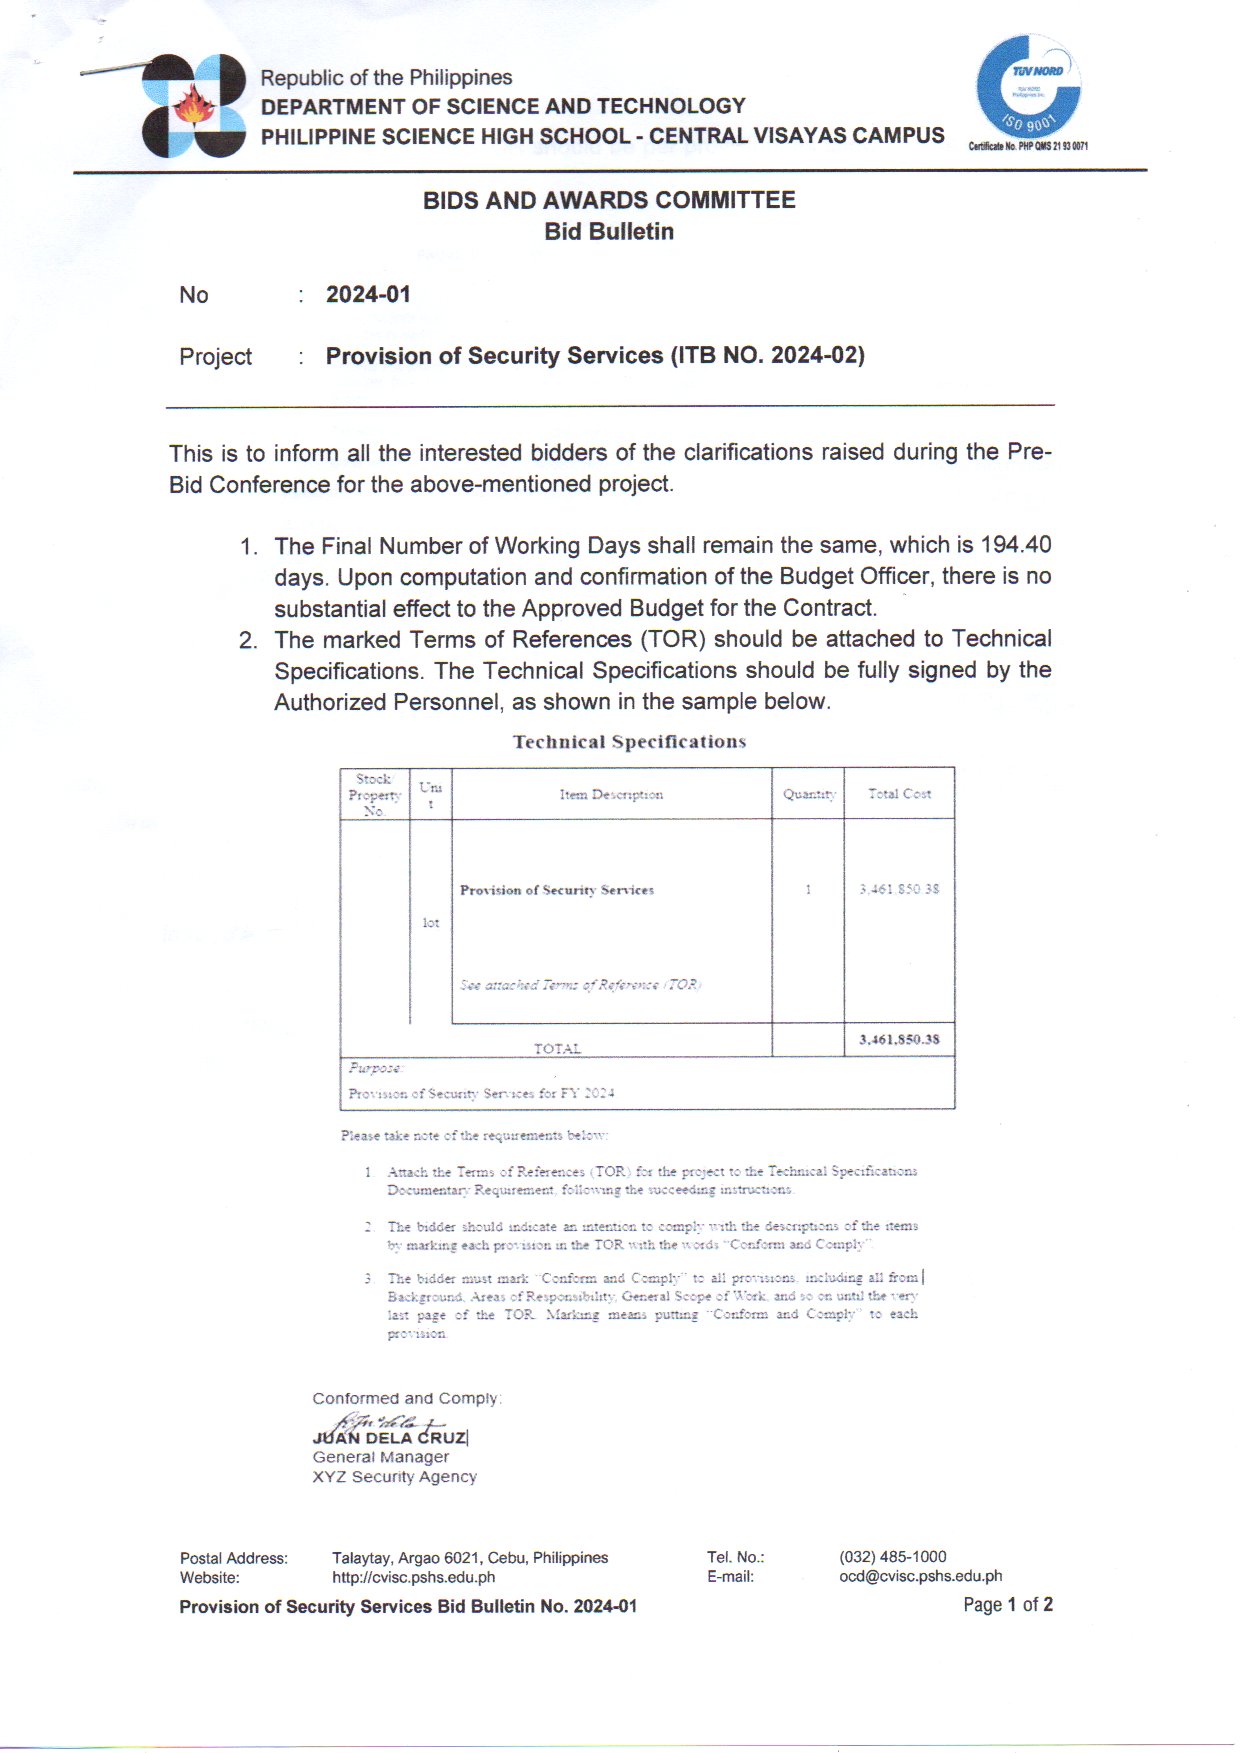 bid bulletin 2024 01 provision security services p1of2